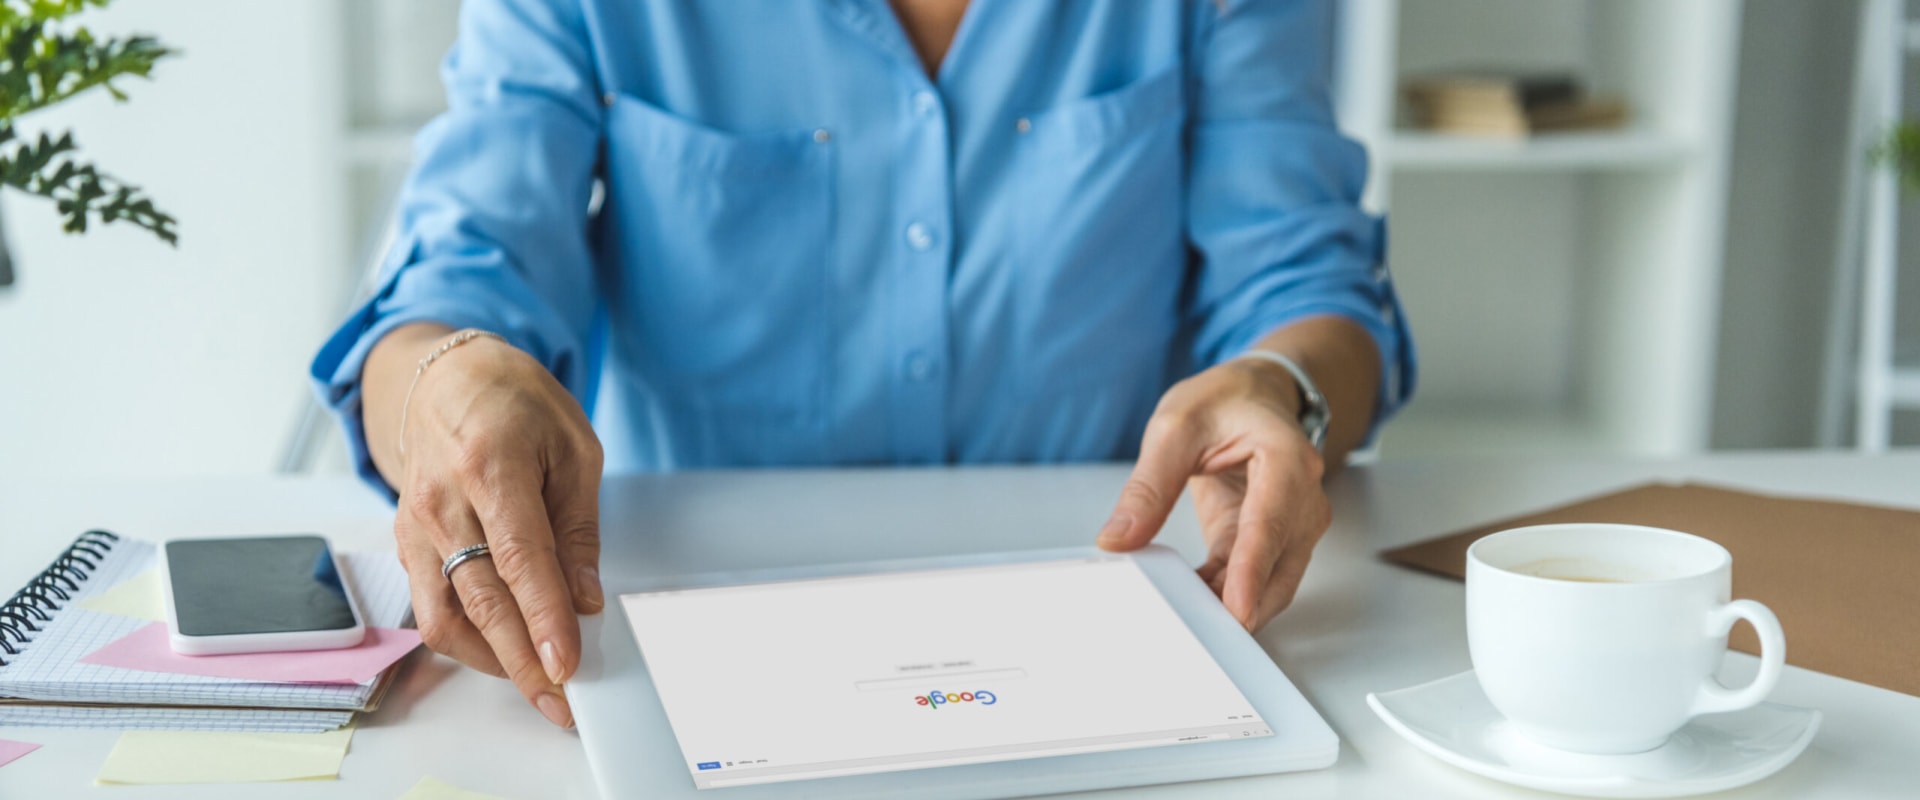 How to Create and Optimize Your Google Business Profile